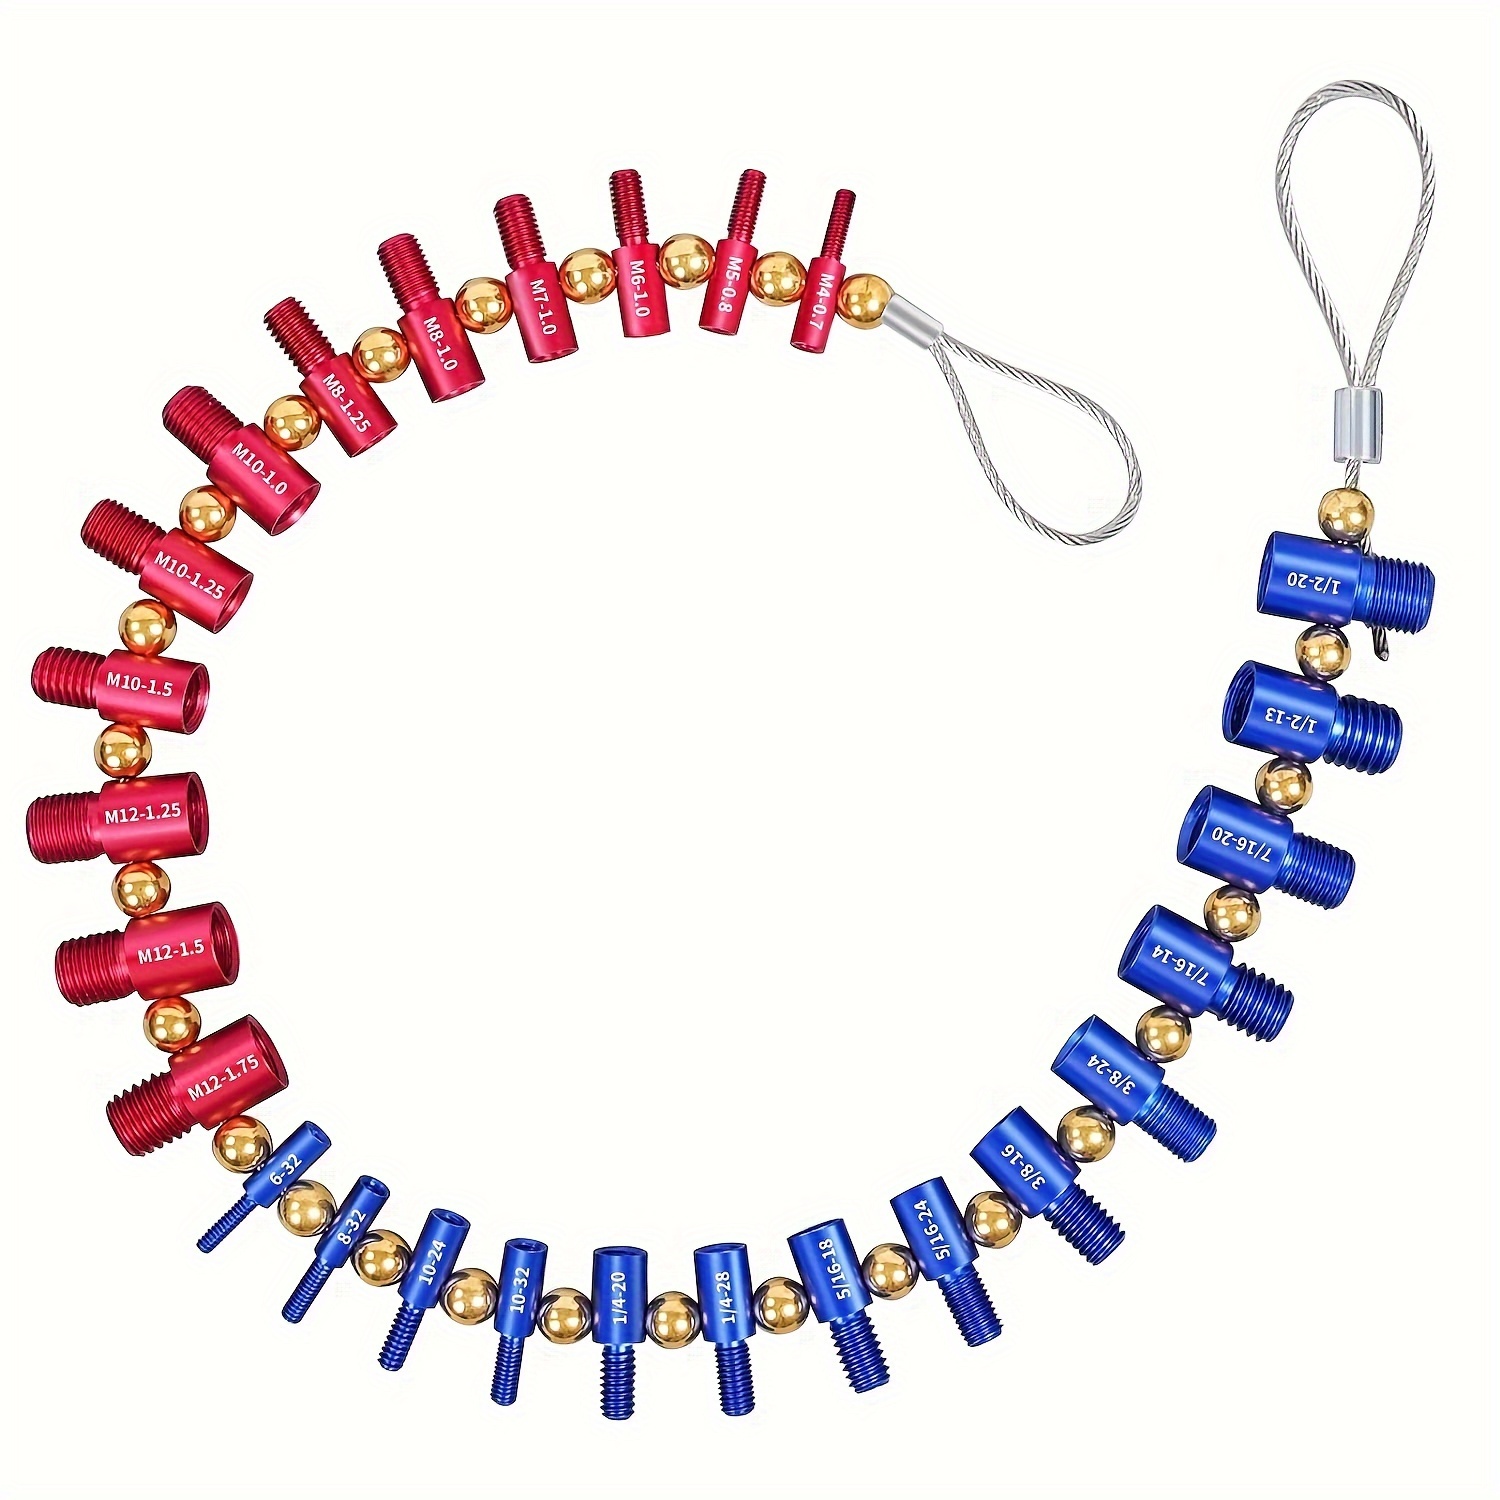 

1pc Nut And Bolt Thread Checker With Wire Lanyard, 26 Male/female Gauges, 14 Standard (inch) & 12 Metric Sizes, Detachable, Red & Blue, Thread Size Gauge Tool For Measuring Bolt Or Hole Threads